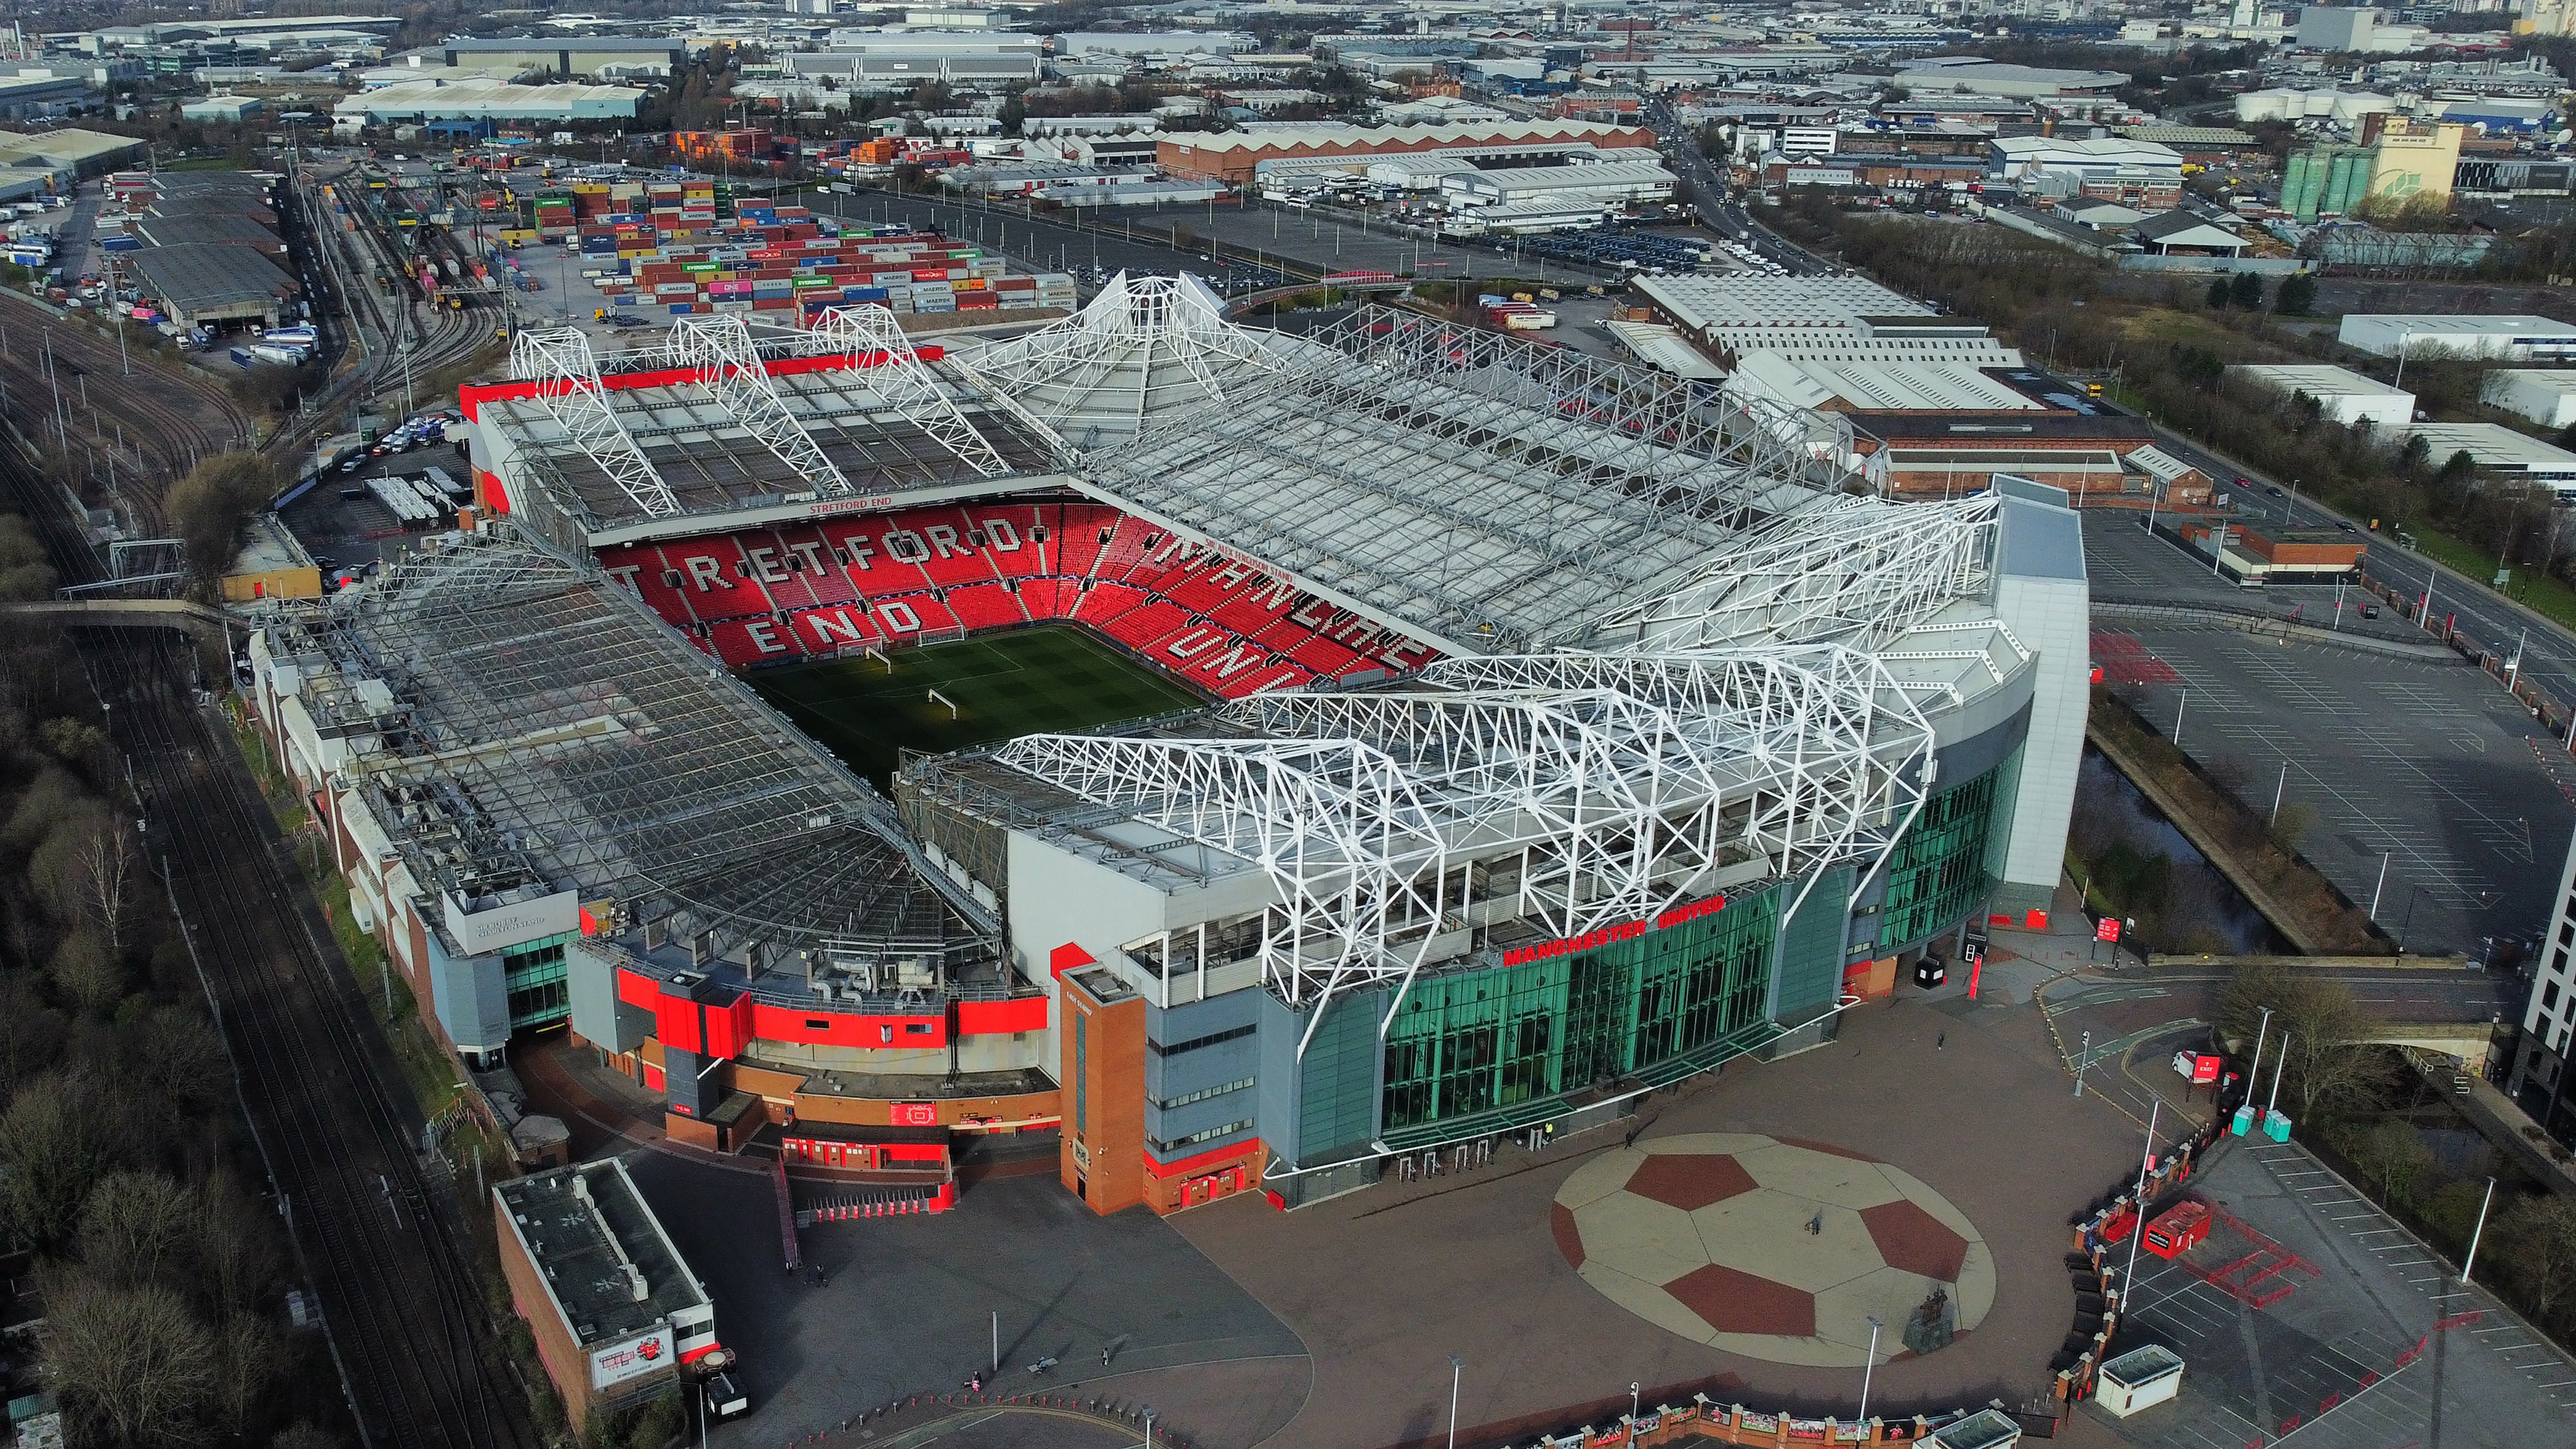 Sir Jim Ratcliffe is keen to redevelop Manchester United’s Old Trafford stadium